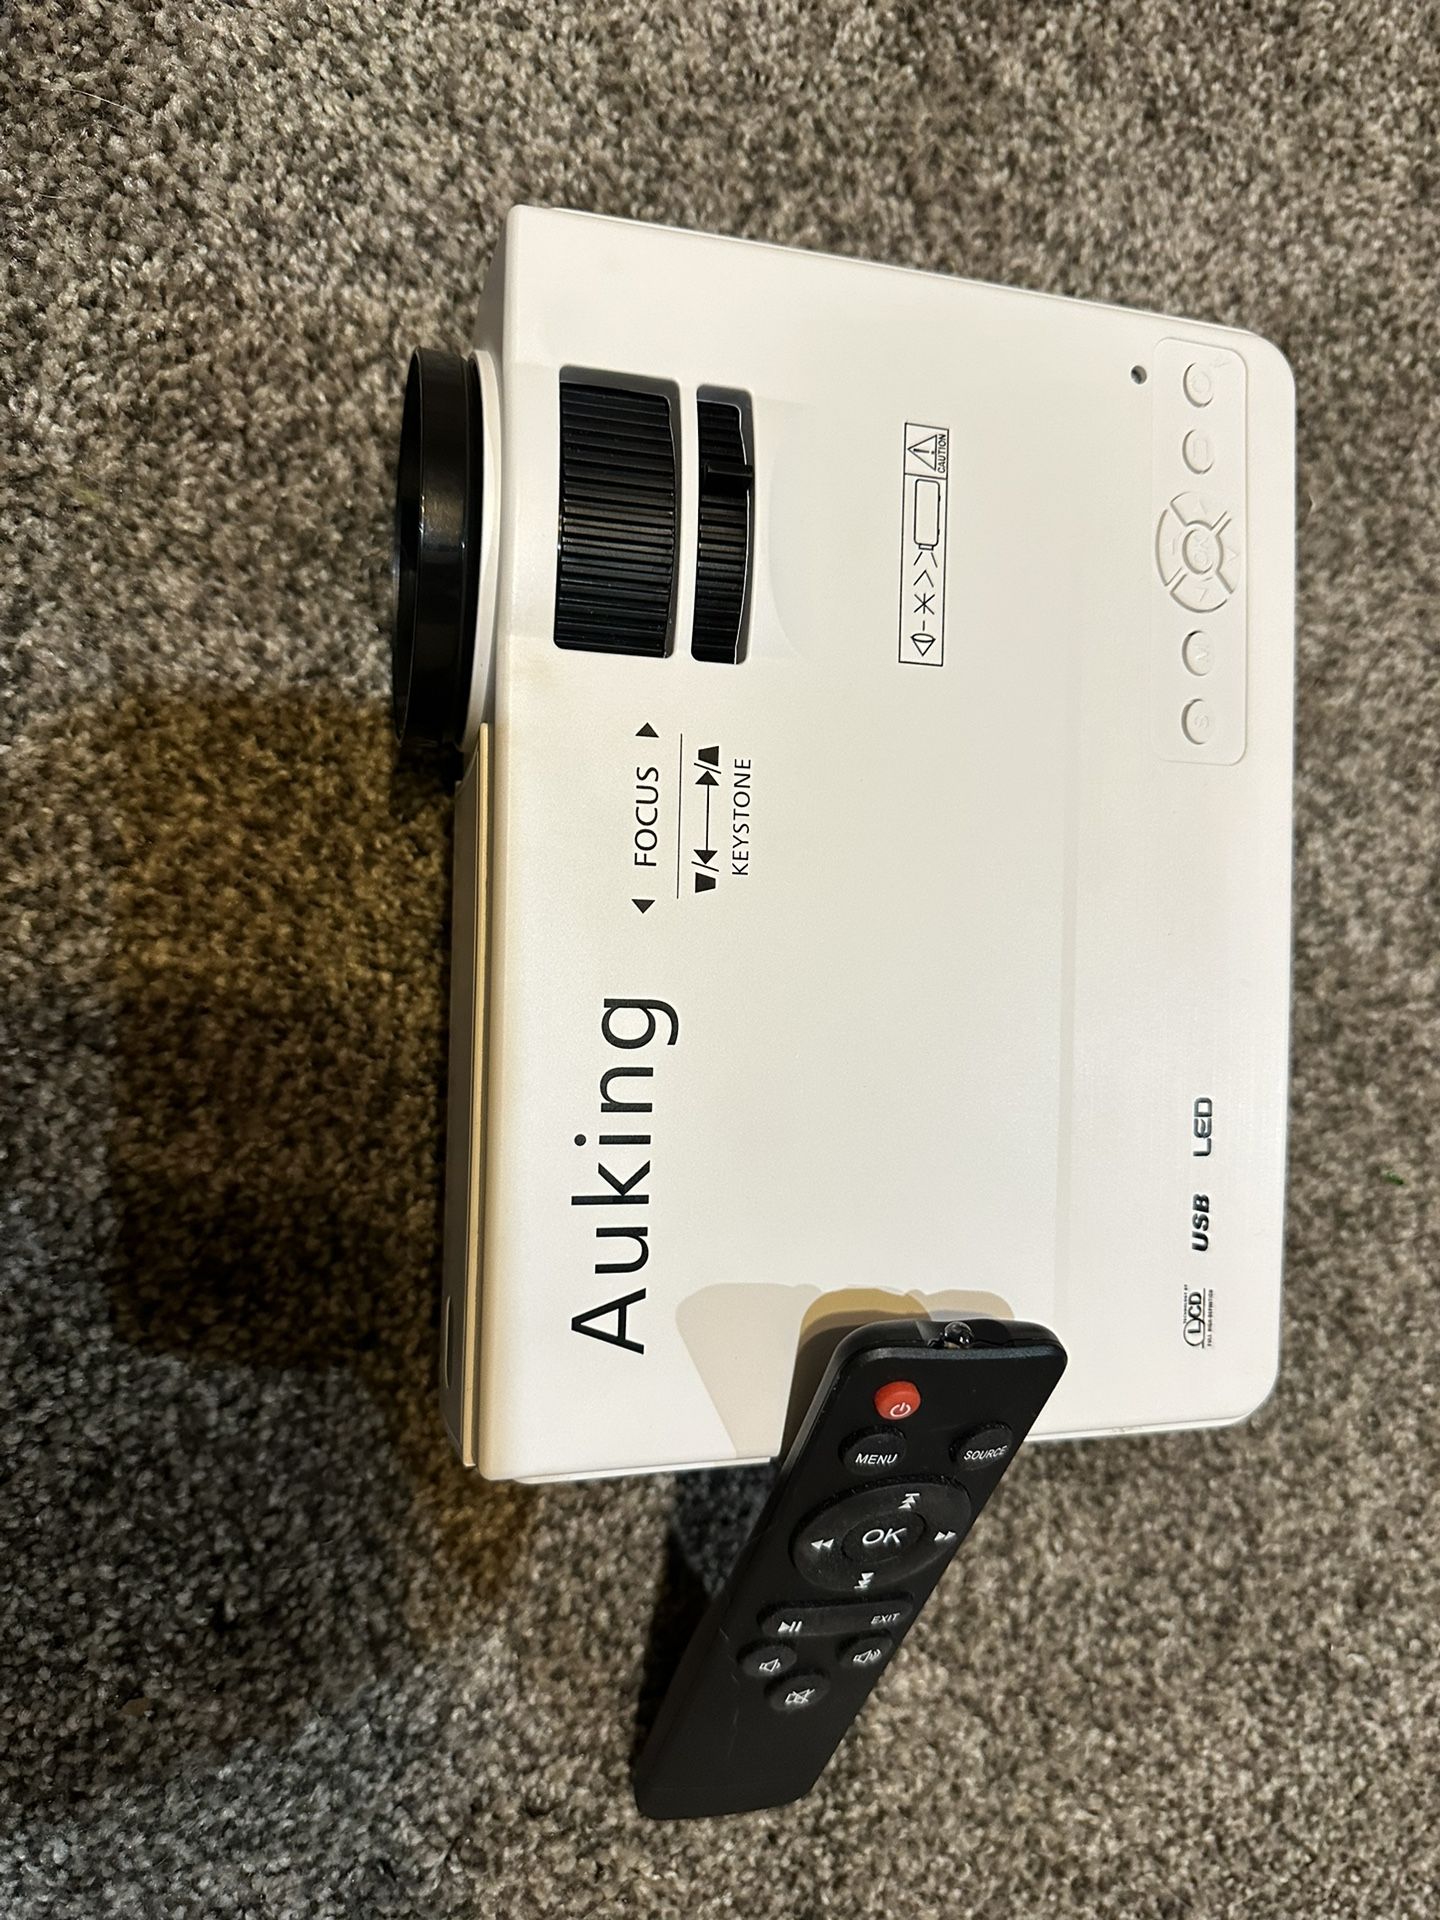 Auking mini projector